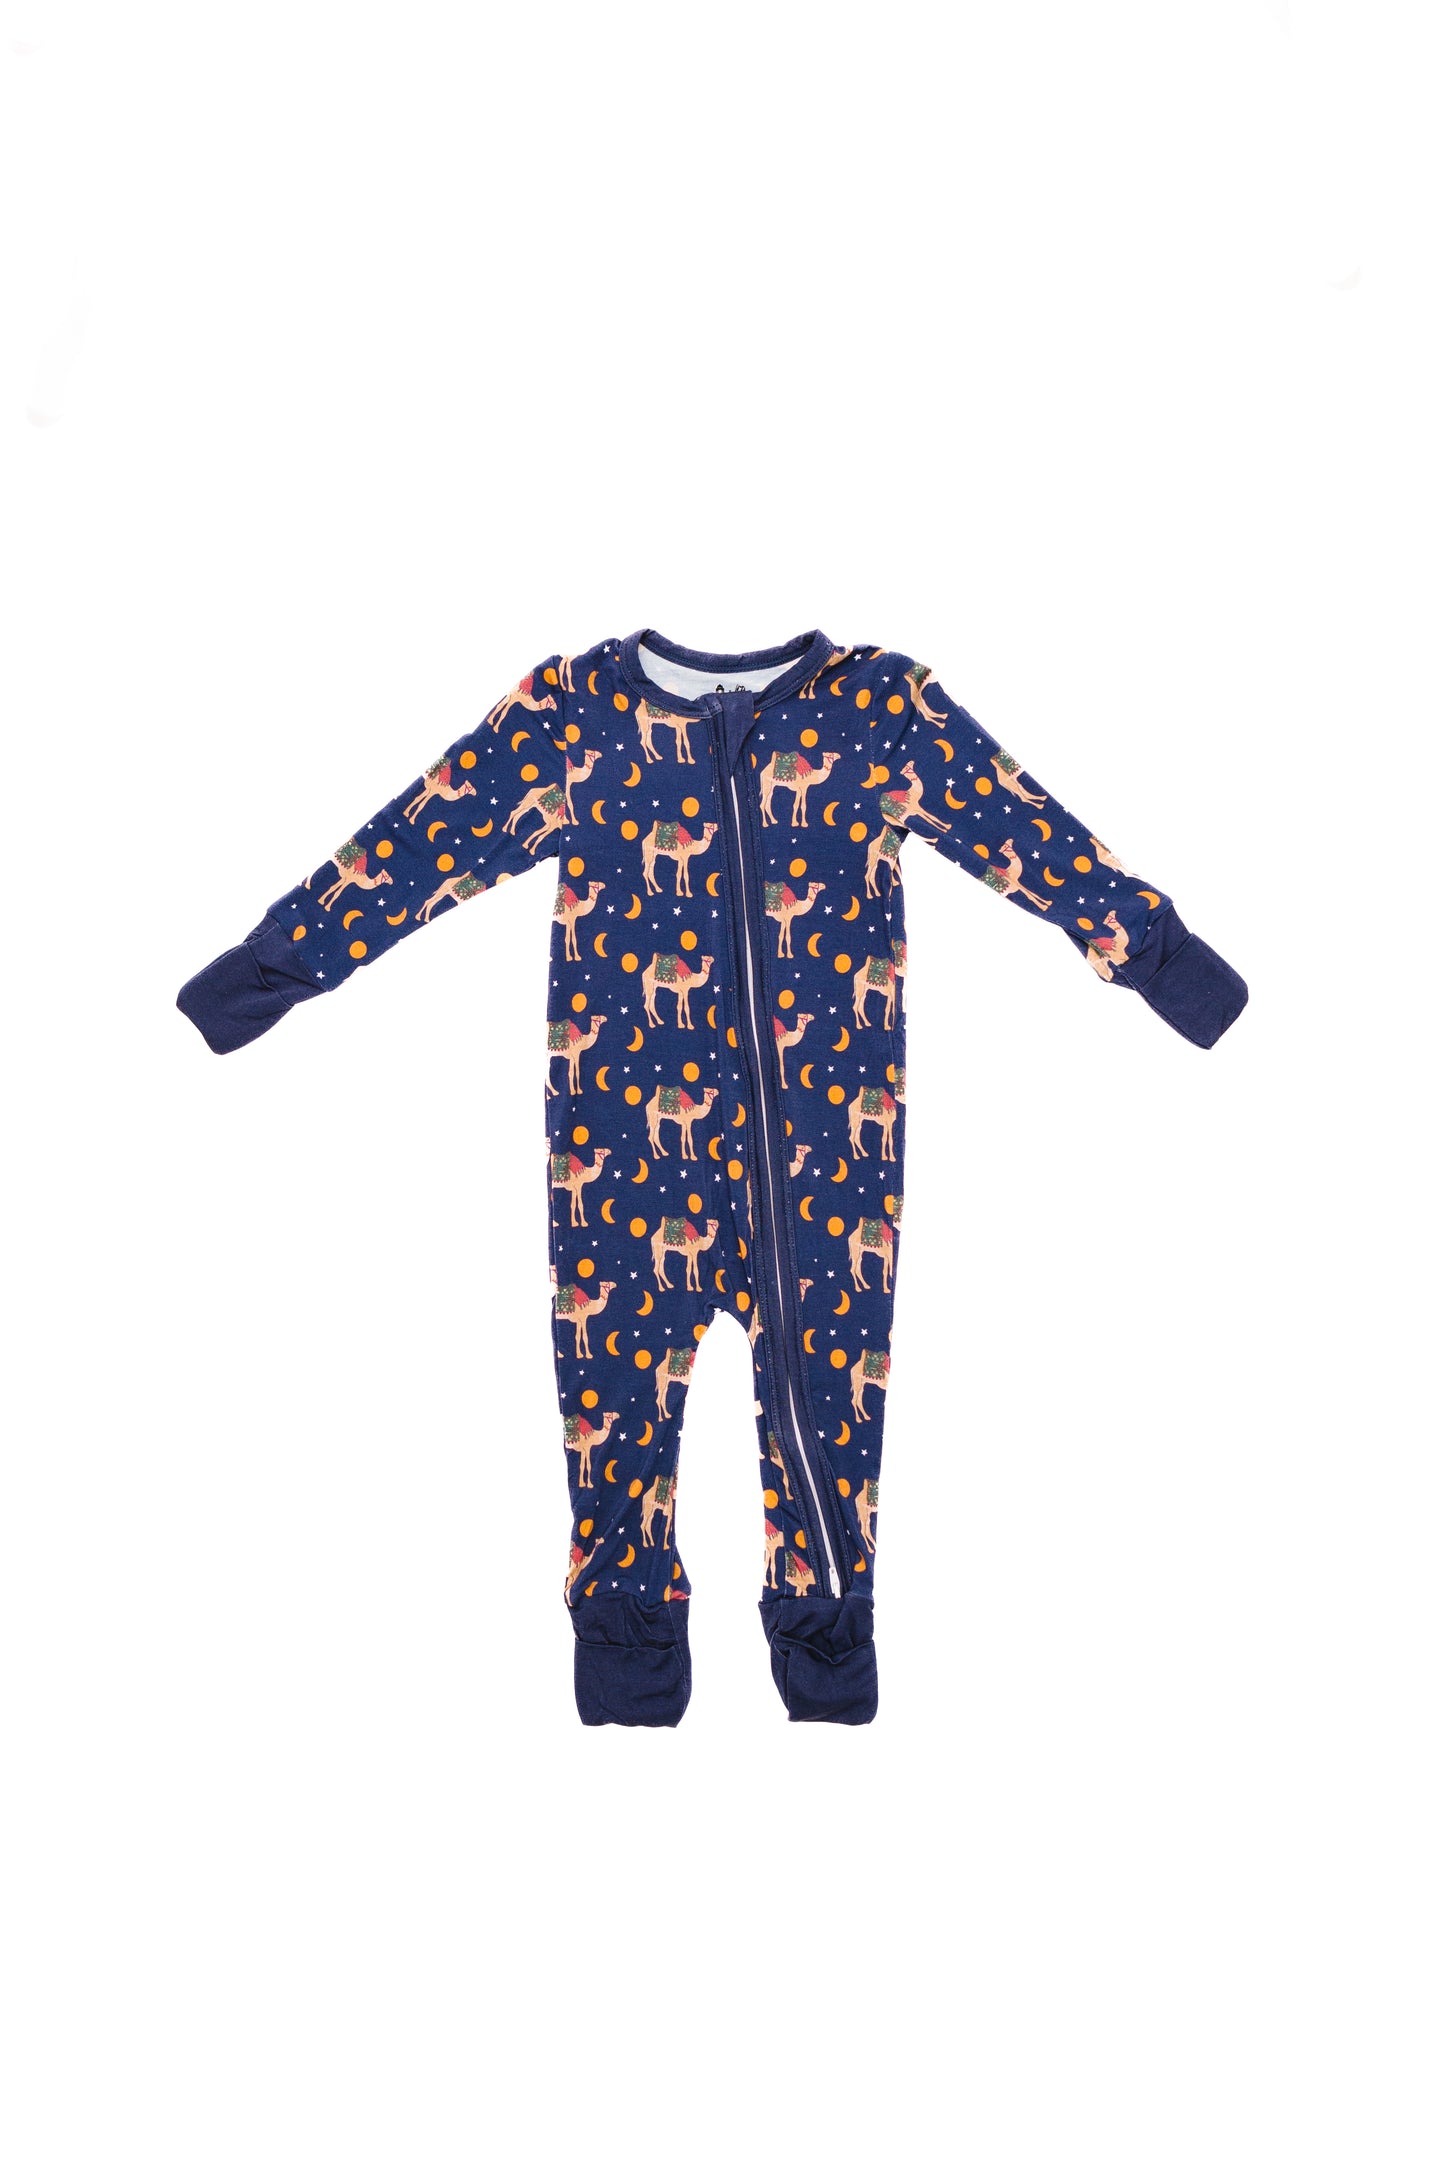 Camel and Moon - Footies & 2 Piece Sets